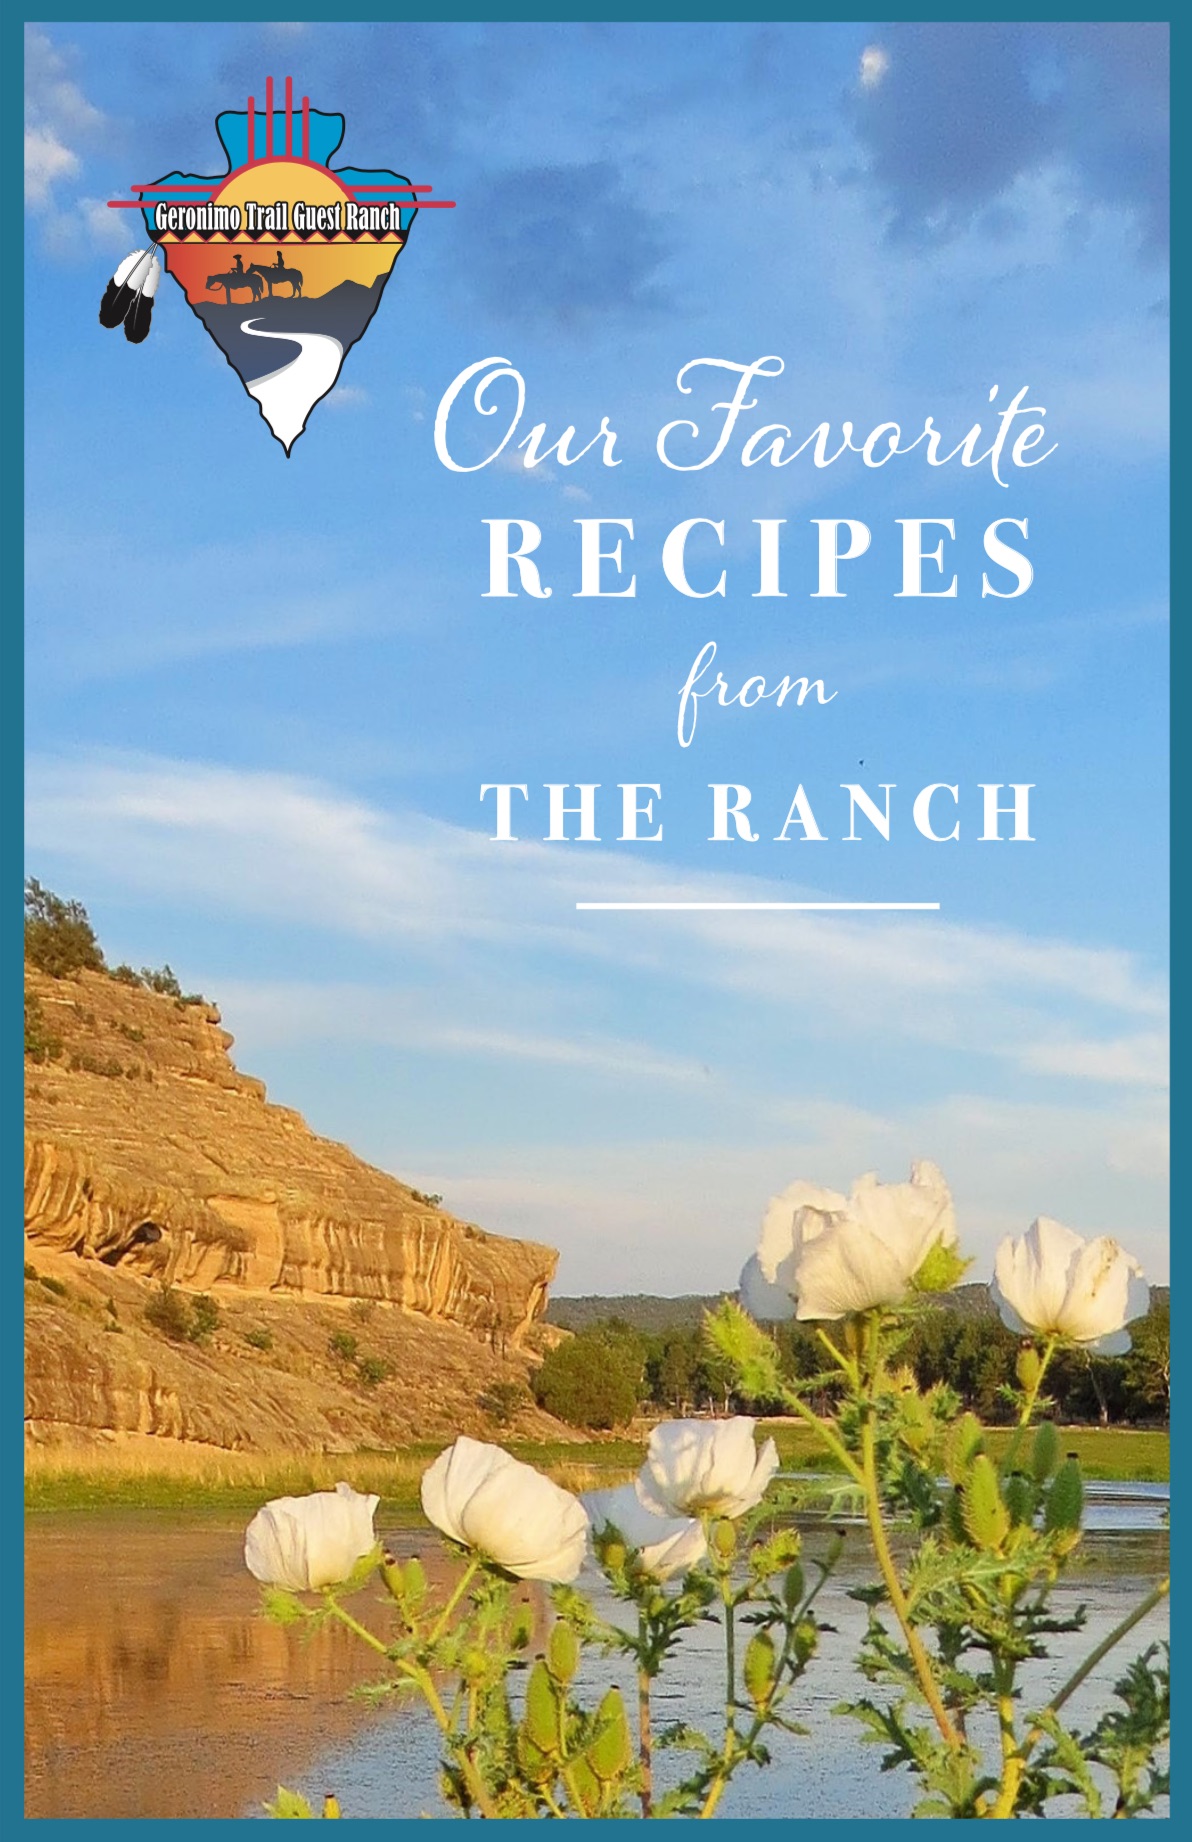 Geronimo Trail Guest Ranch Cookbook Cover